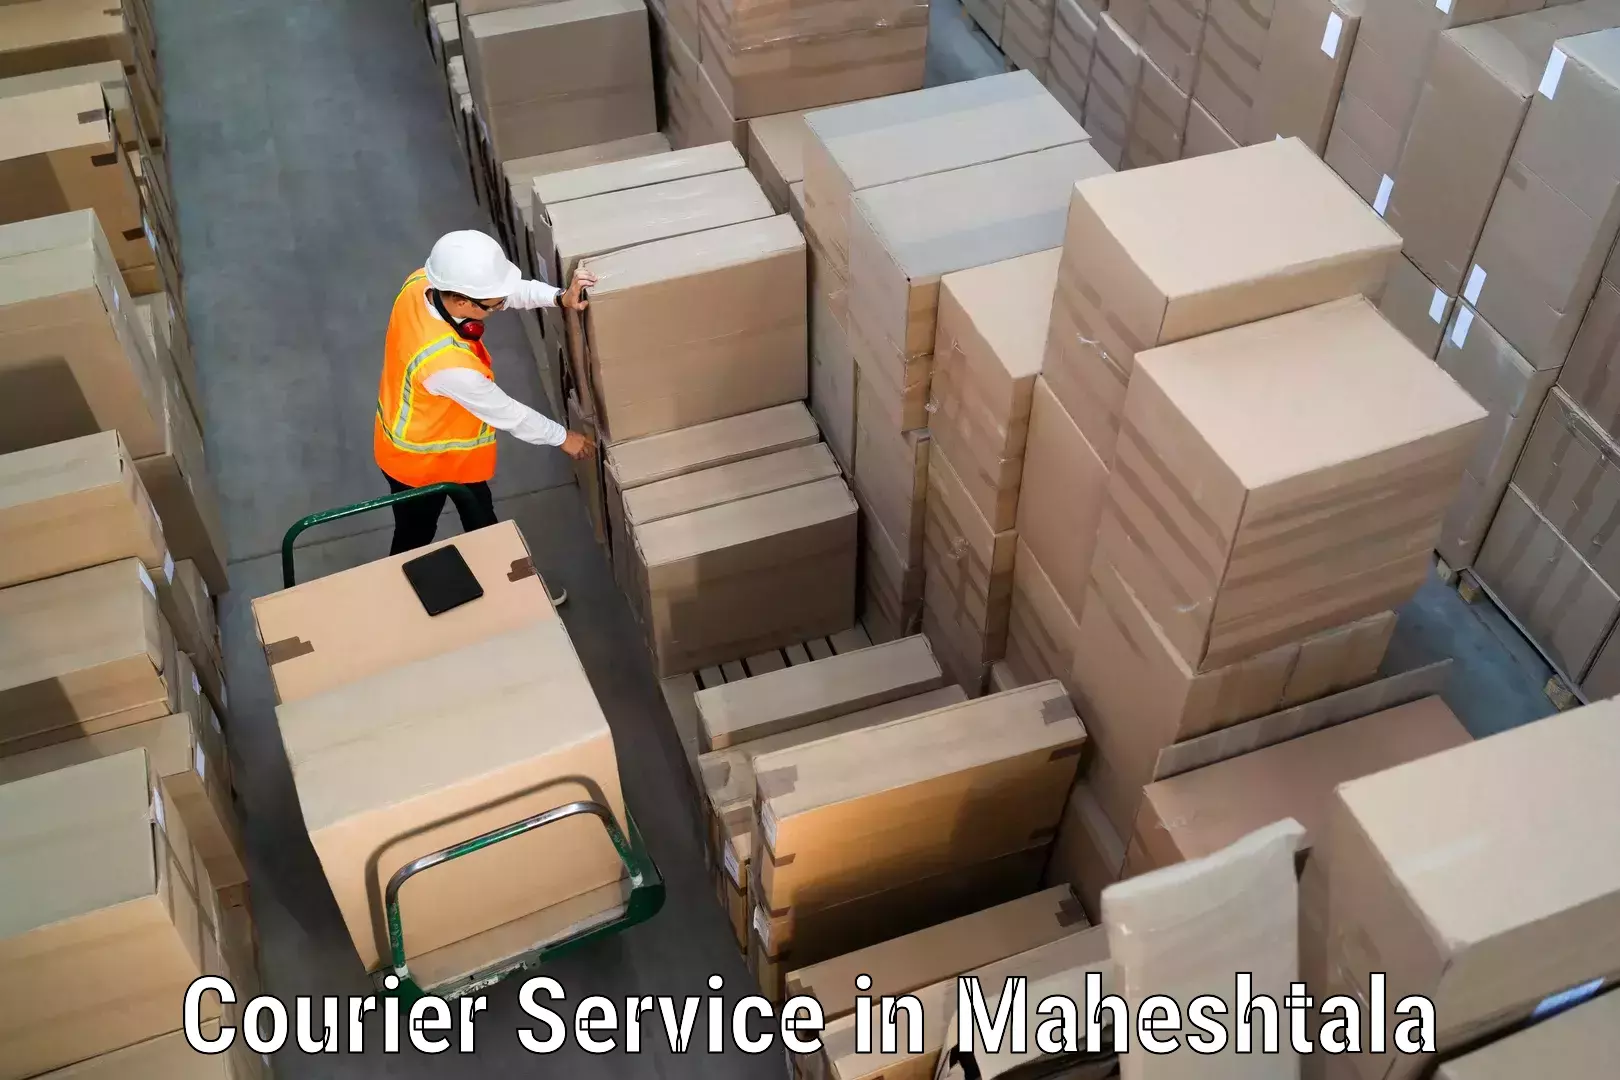 Express package services in Maheshtala